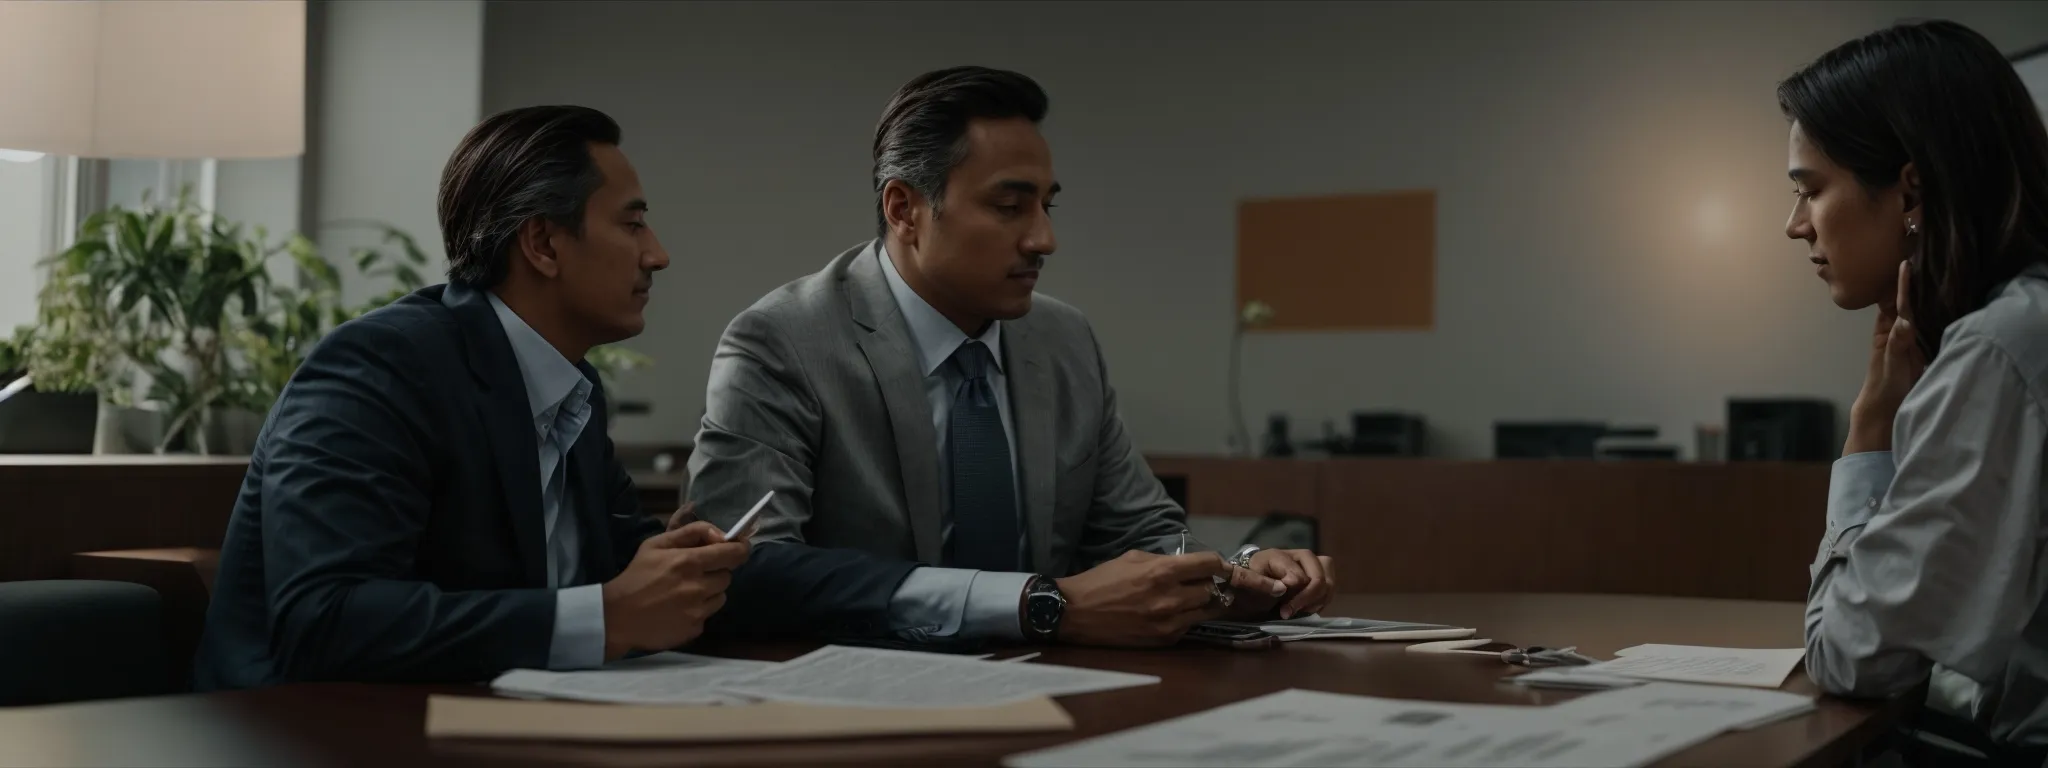 two professionals sit facing each other across a table, discussing a document in a well-lit office meeting room.